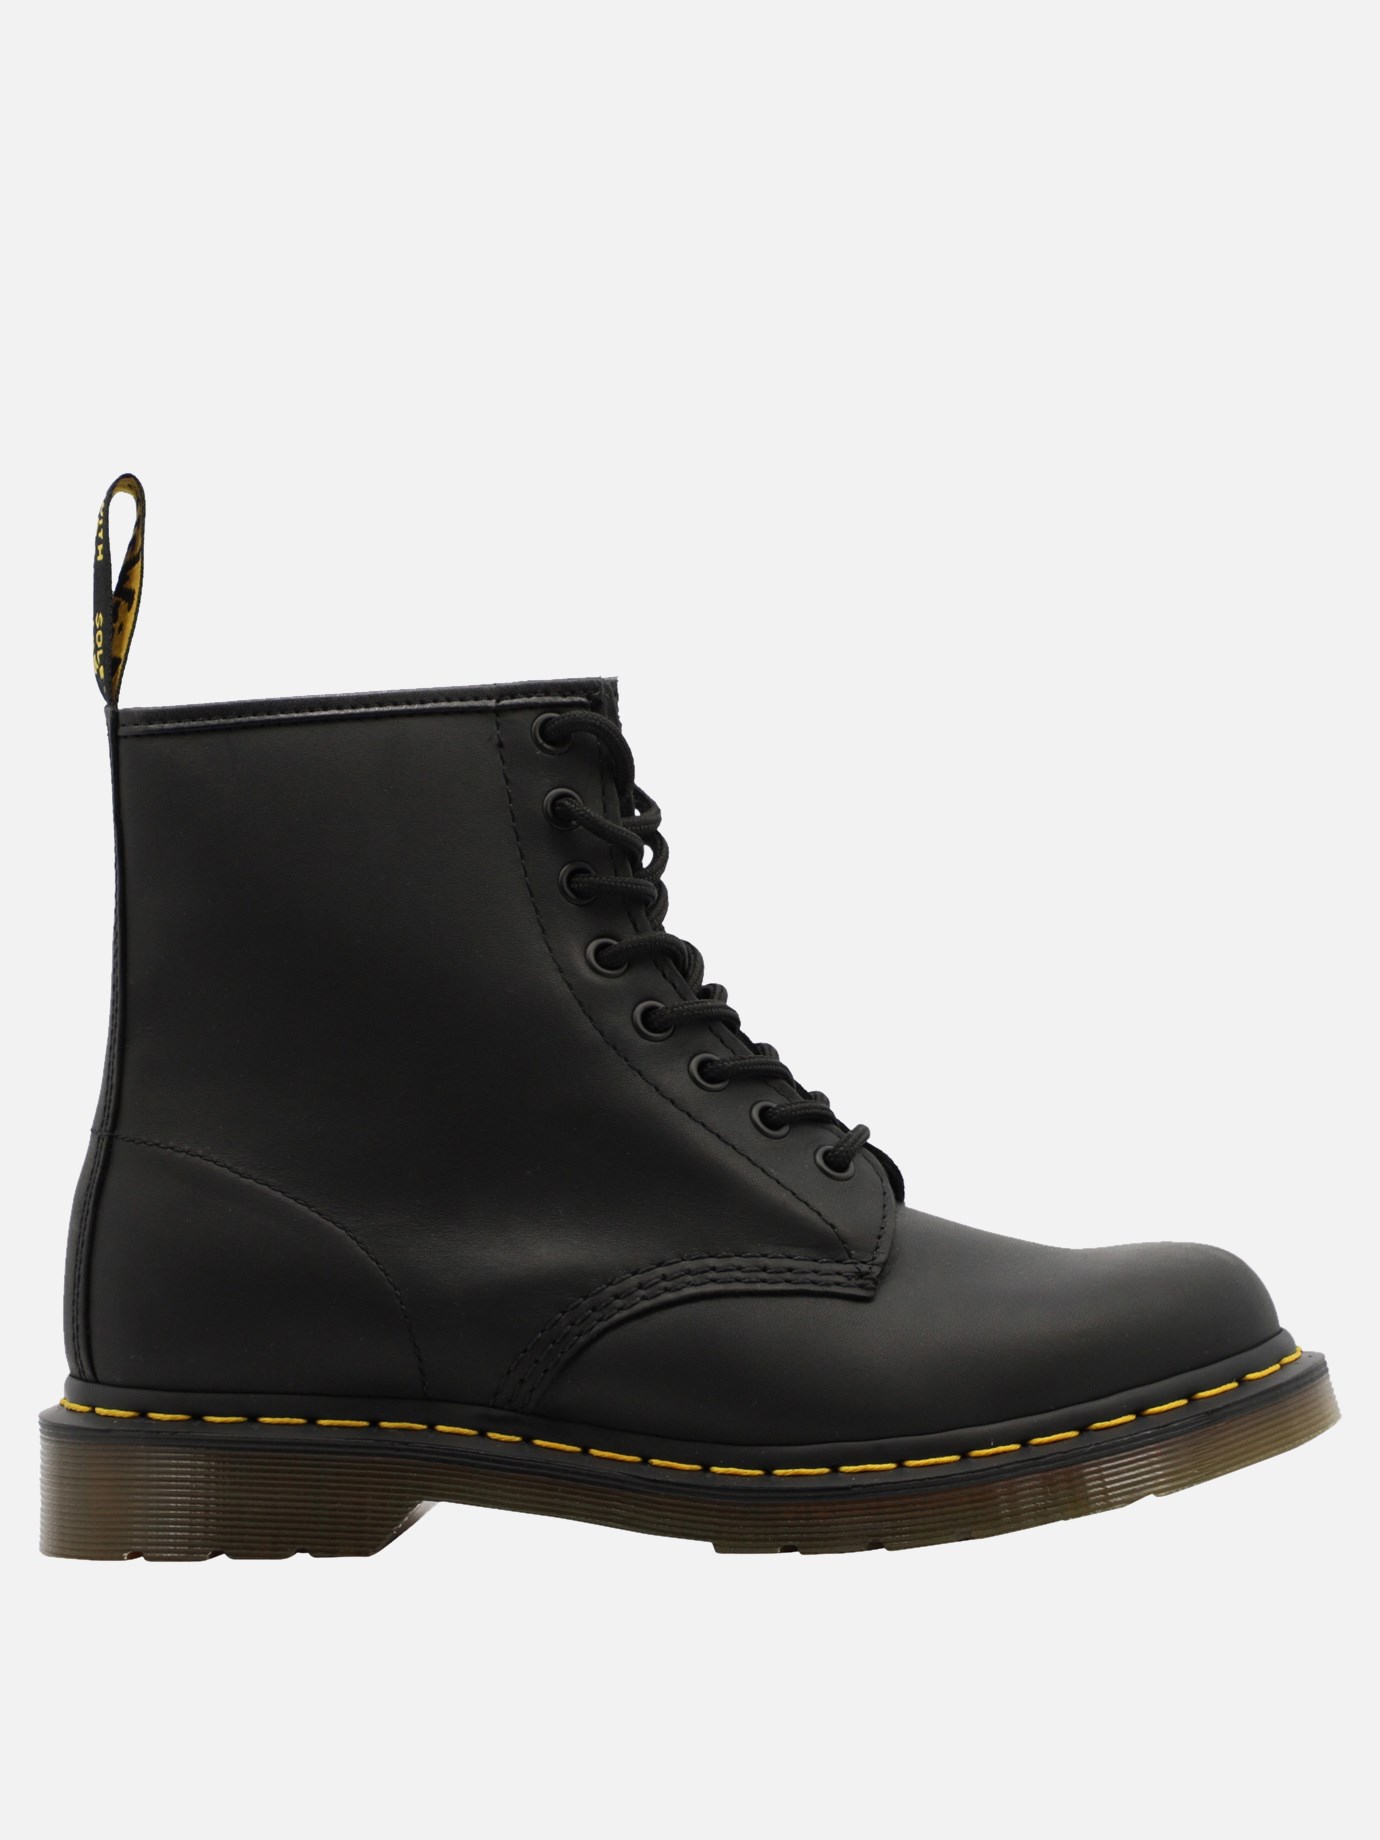  1460  military bootsby Dr. Martens - 0